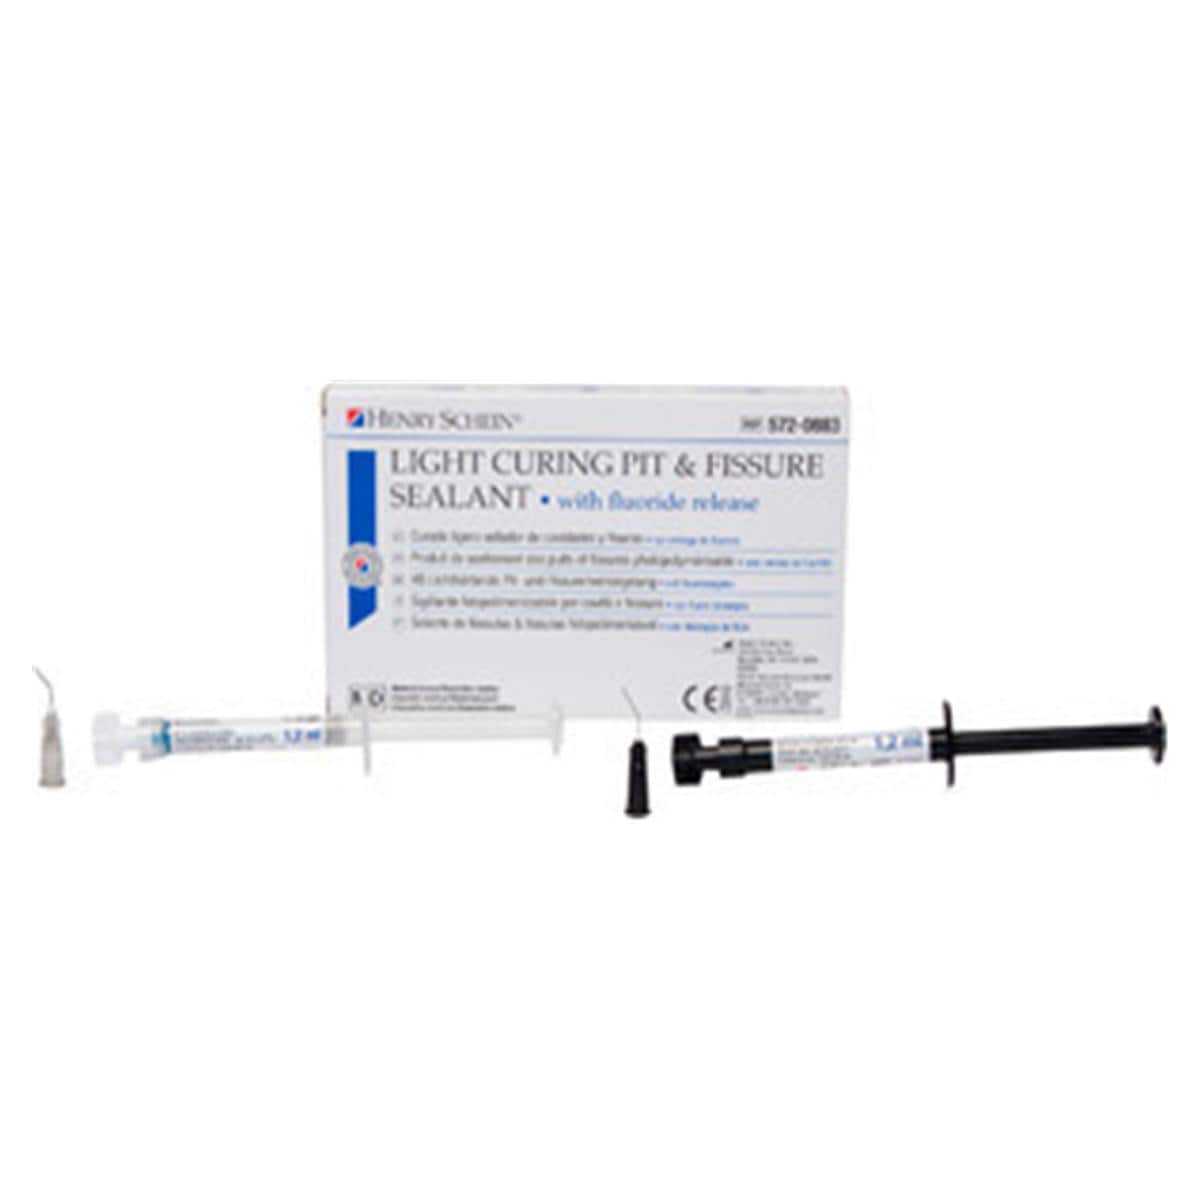 Light Curing Pit & Fissure Sealant - Kit